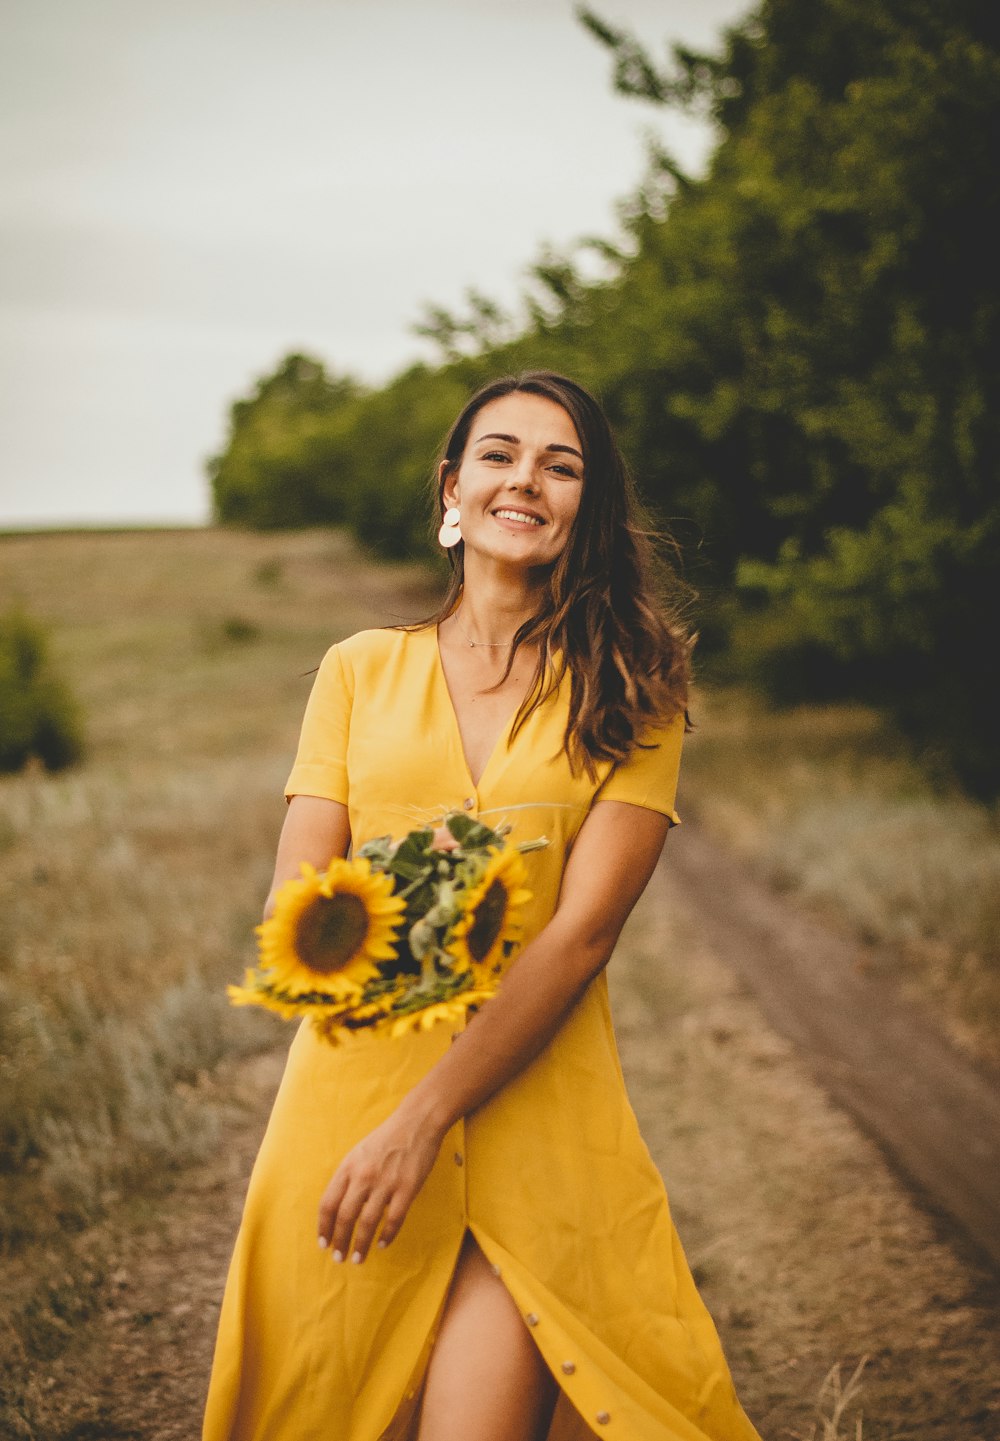 woman in yellow dress holding sunflower